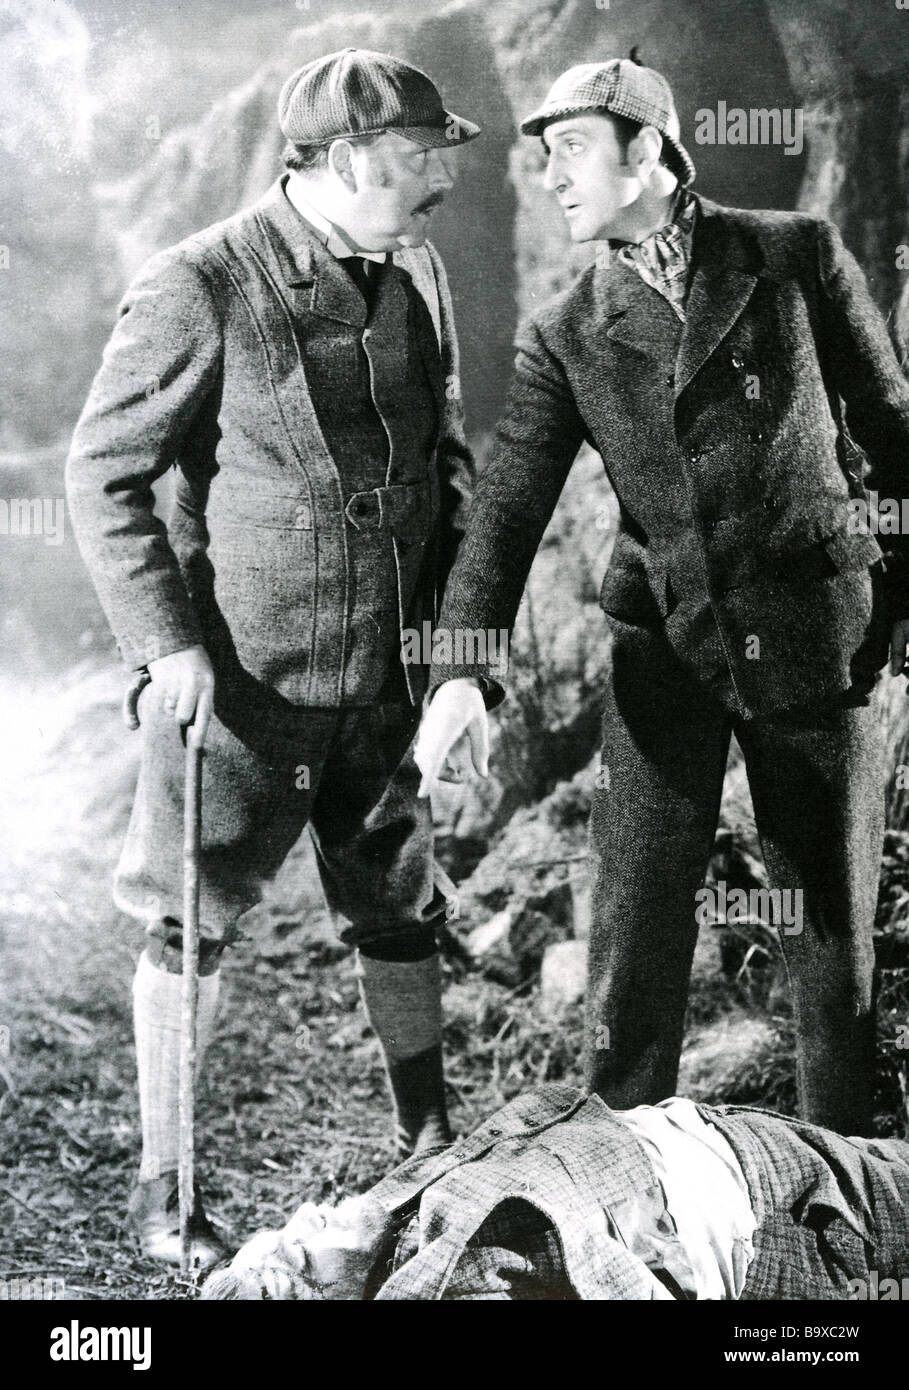 THE HOUND OF THE BASKERVILLES 1939 TCF film with Nigel Bruce at left as Dr Watson and Basil Rathbone as Sherlock Holmes Stock Photo